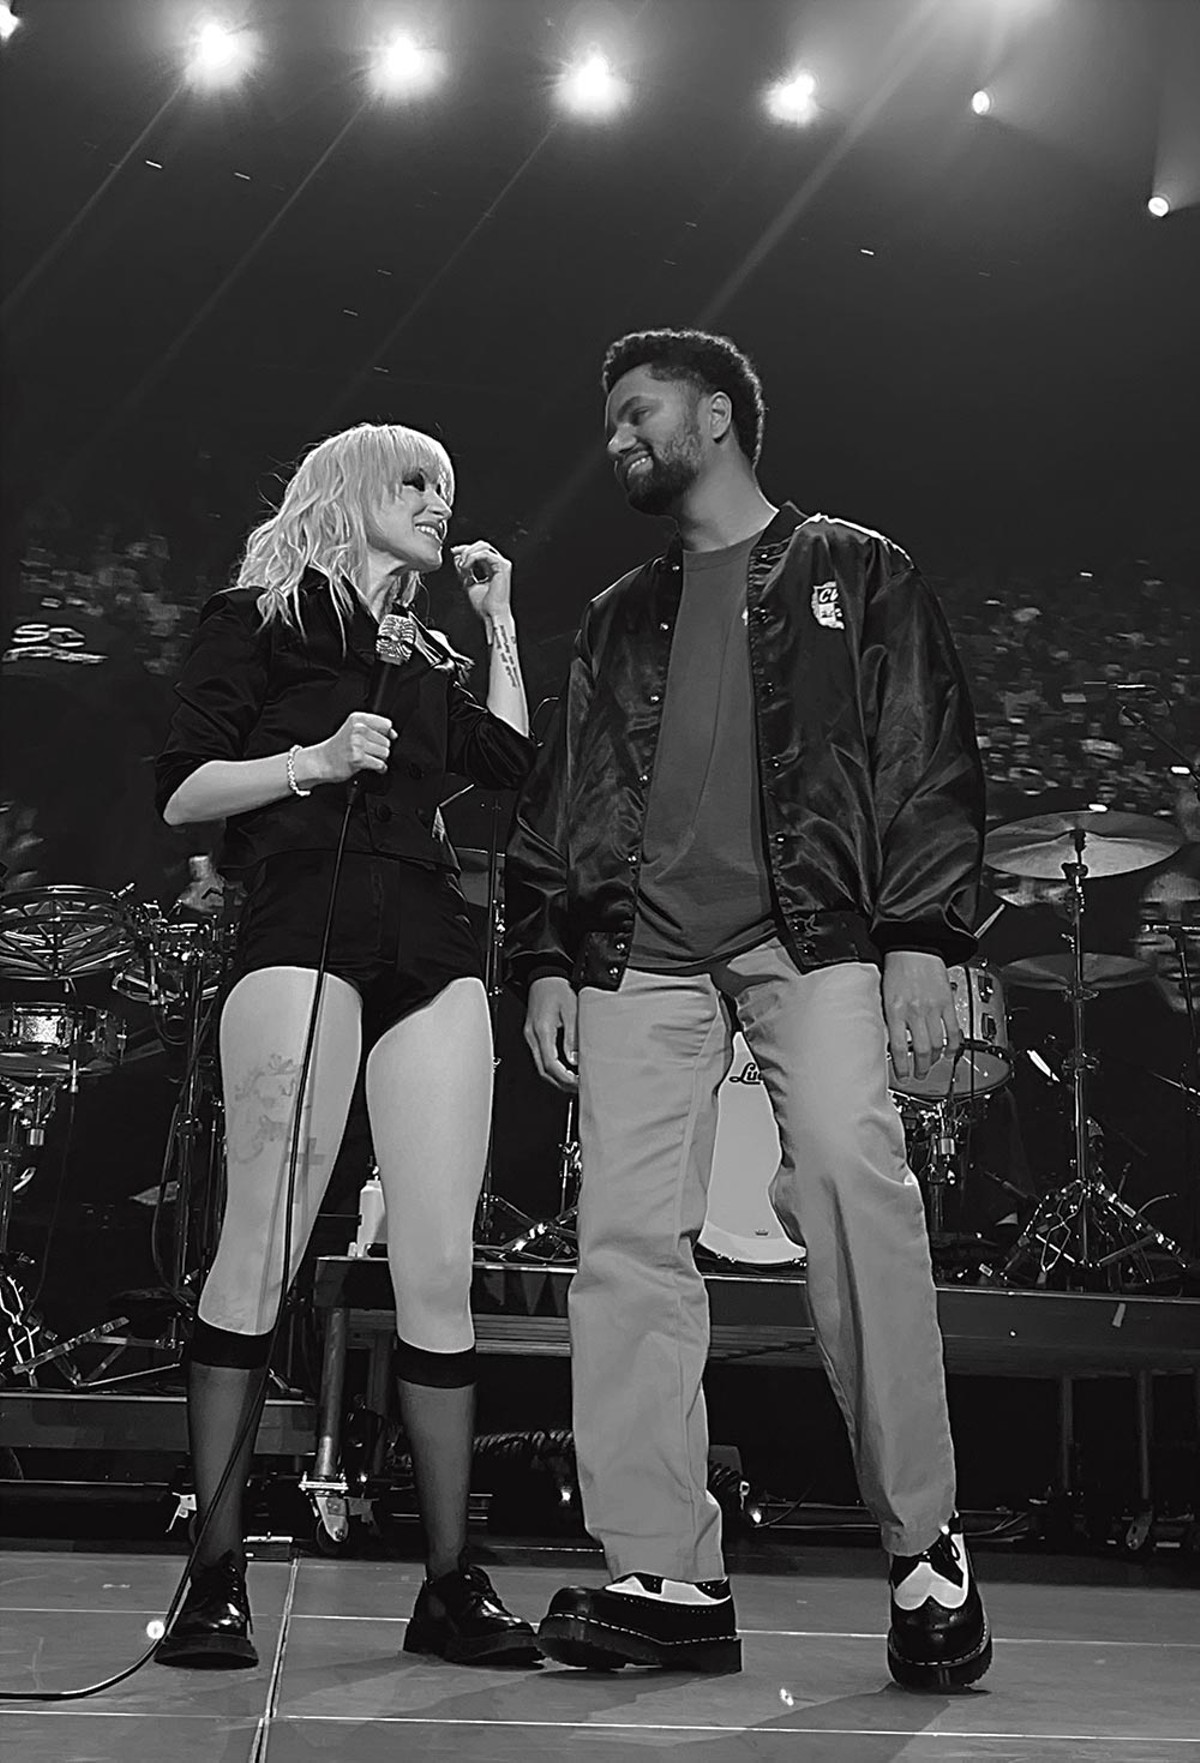 Best Stomp Speech: Maxwell Frost onstage with Paramore